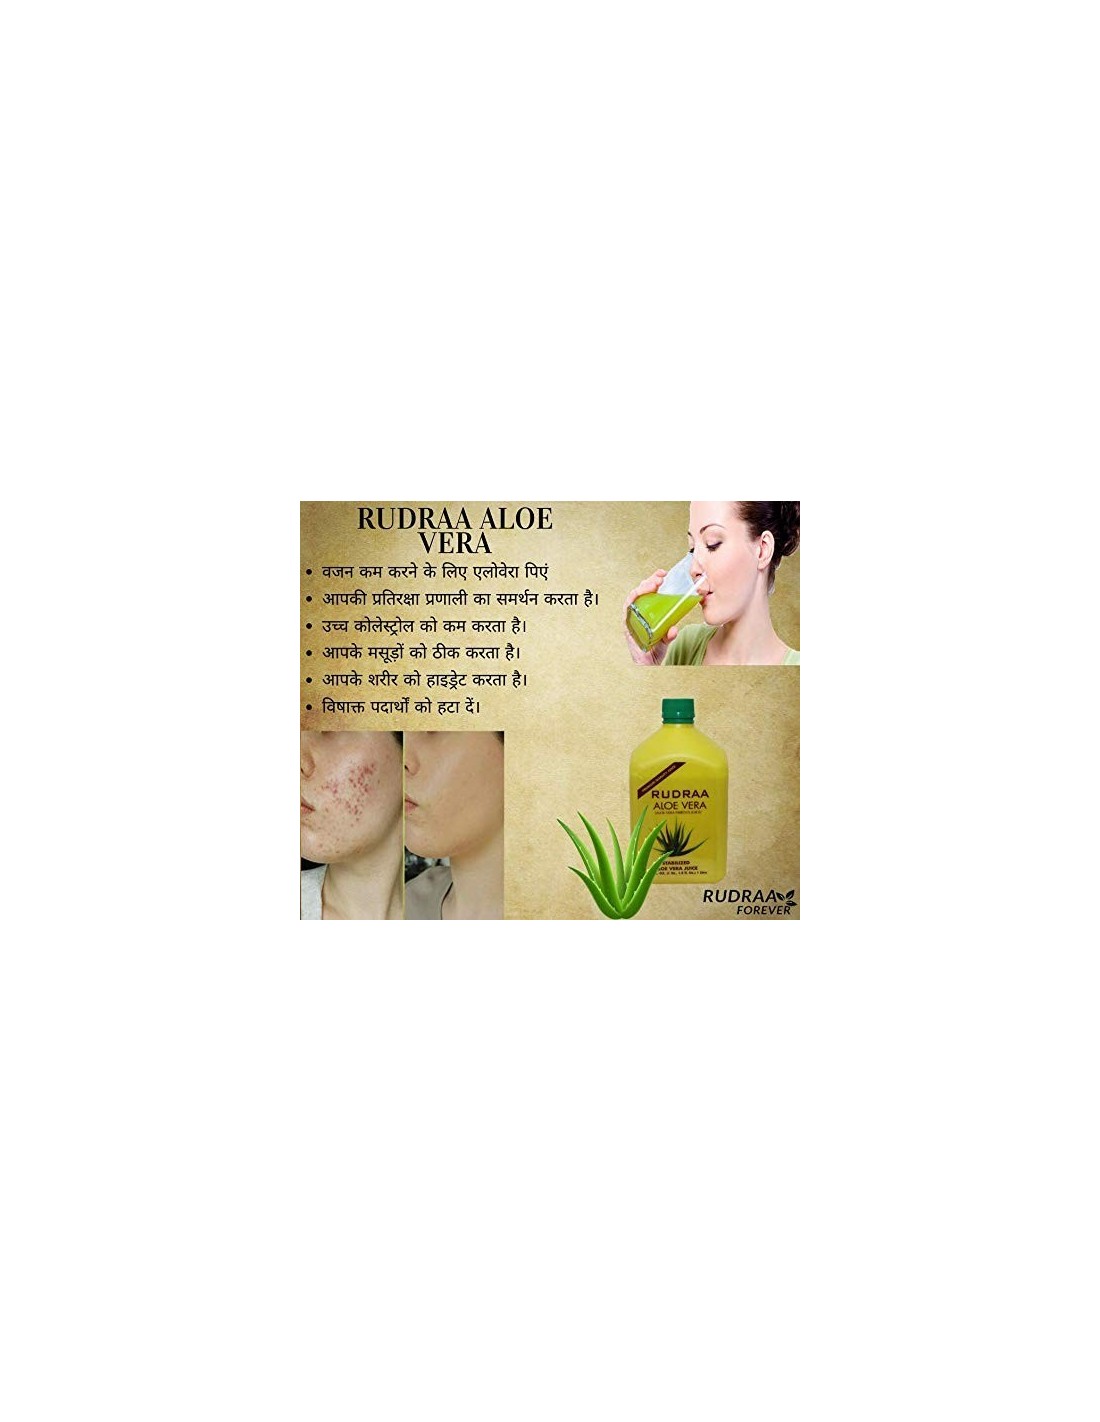 Rudraa Aloe Vera Fibrous Juice With Its Miraculous Benefits For Your 9210